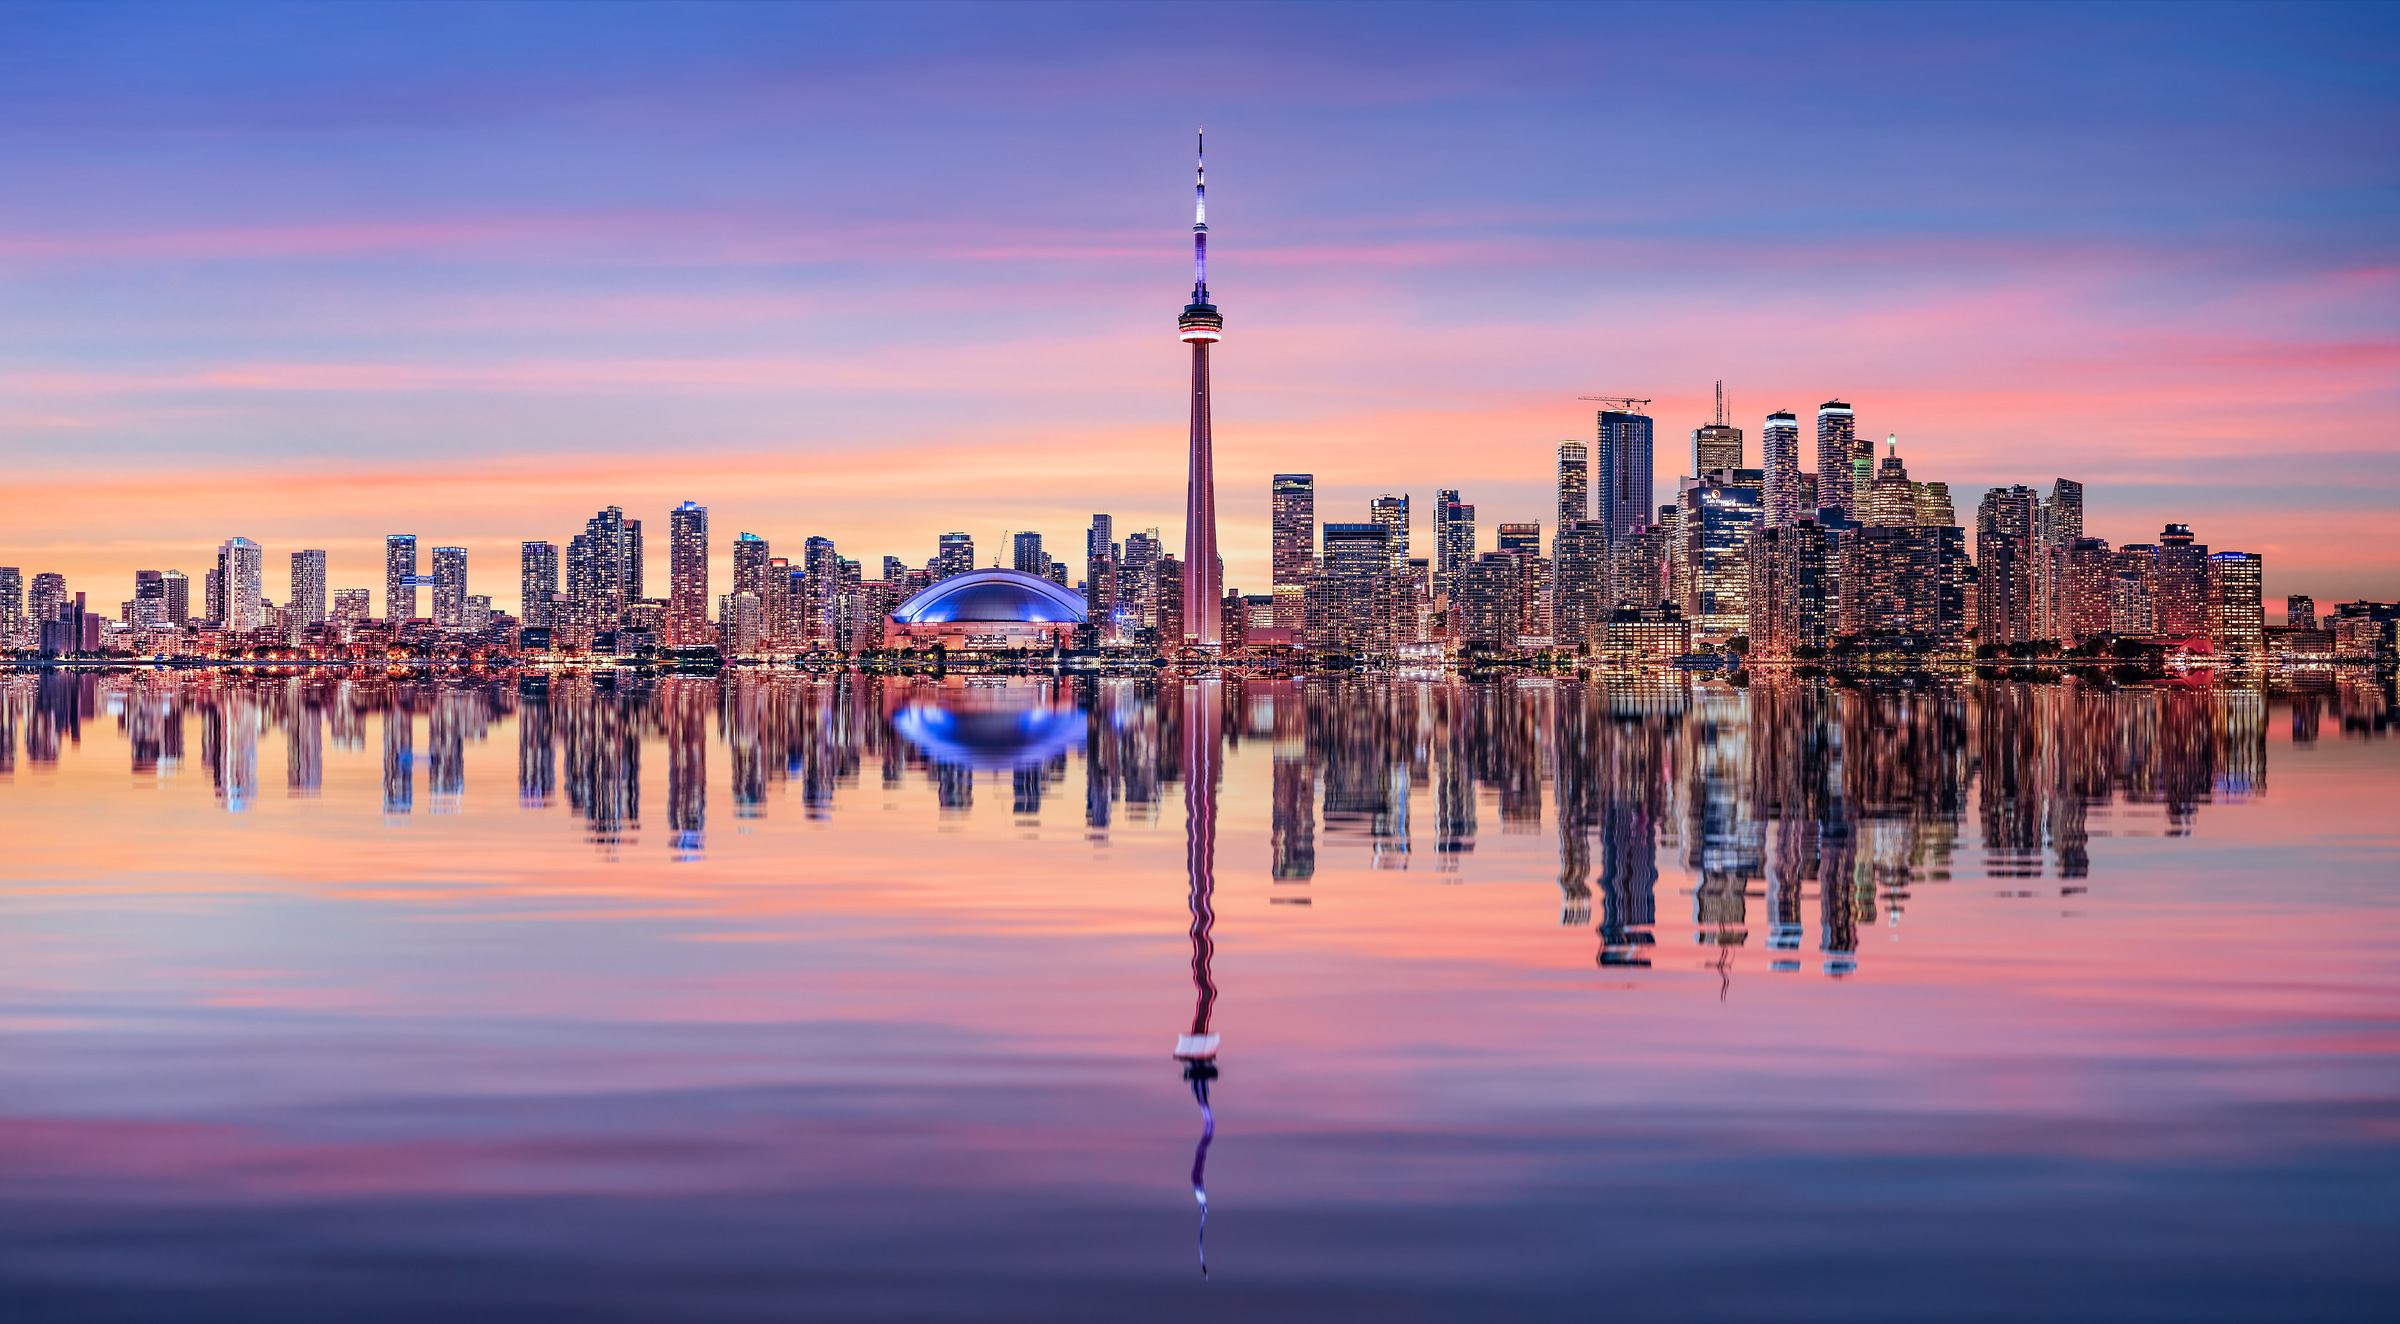 536 megapixels! A very high resolution, large-format VAST photo print of the Toronto skyline at sunset; cityscape photograph created by Chris Collacott in Toronto, Ontario, Canada